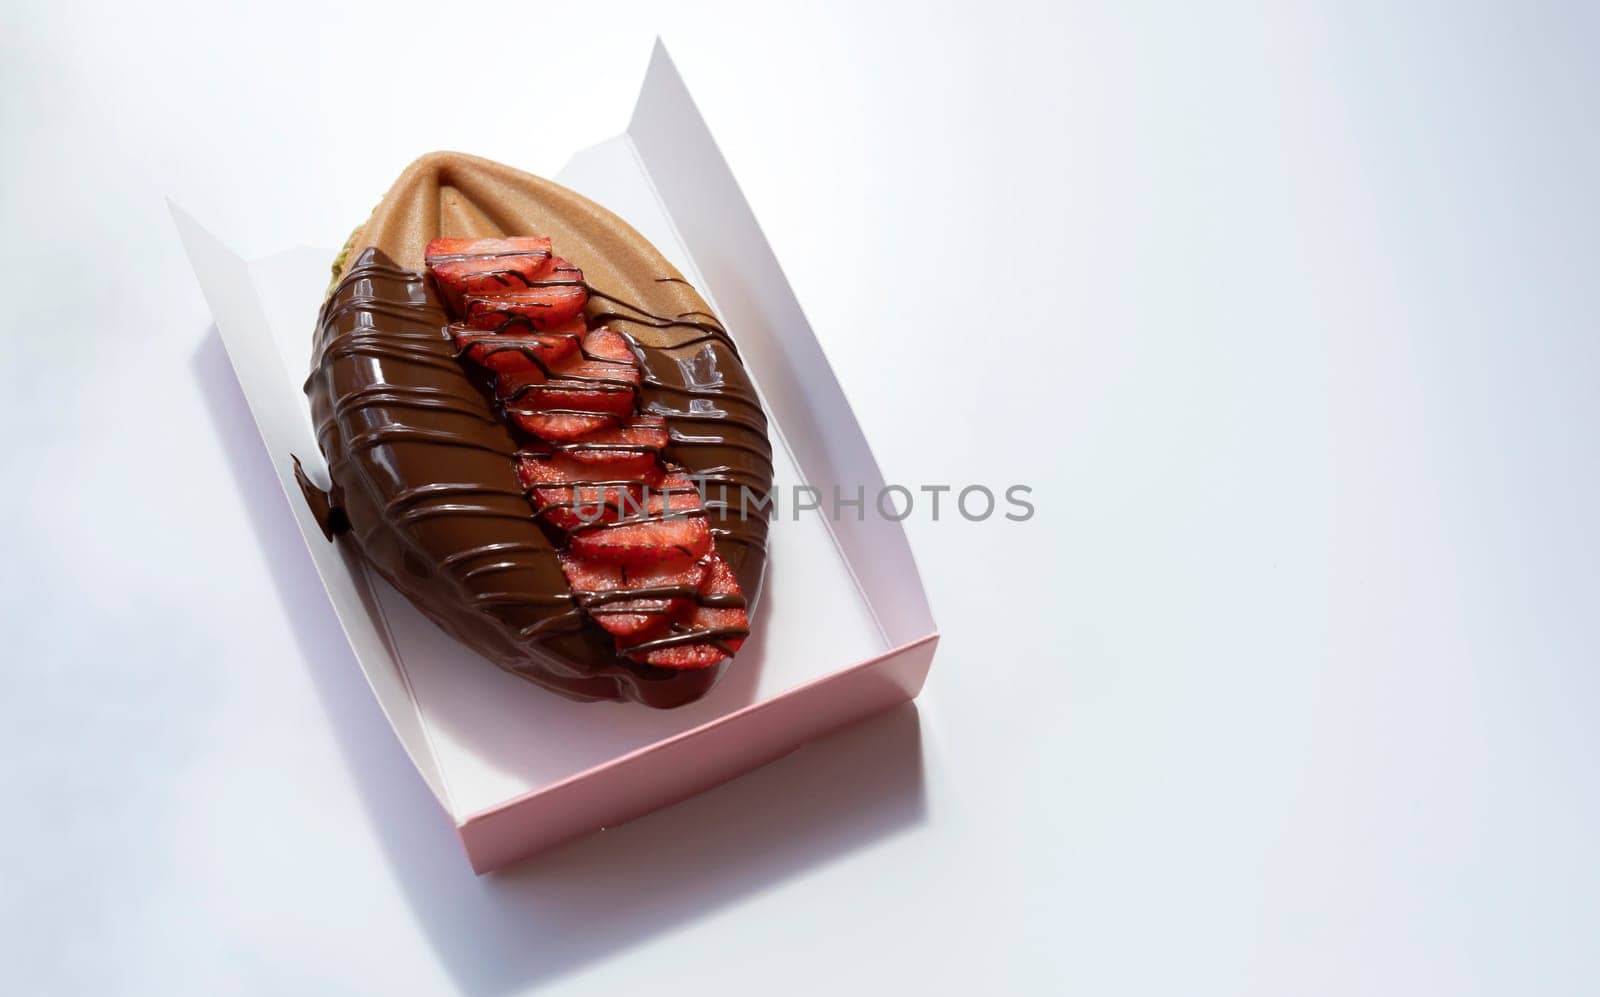 Closeup Genital Vagina Shaped Waffle With Berries and Dark Chocolate On Table, Gray Background. Festival Street Food, Cookie. Horizontal Plane, Copy Space for Text. High quality photo